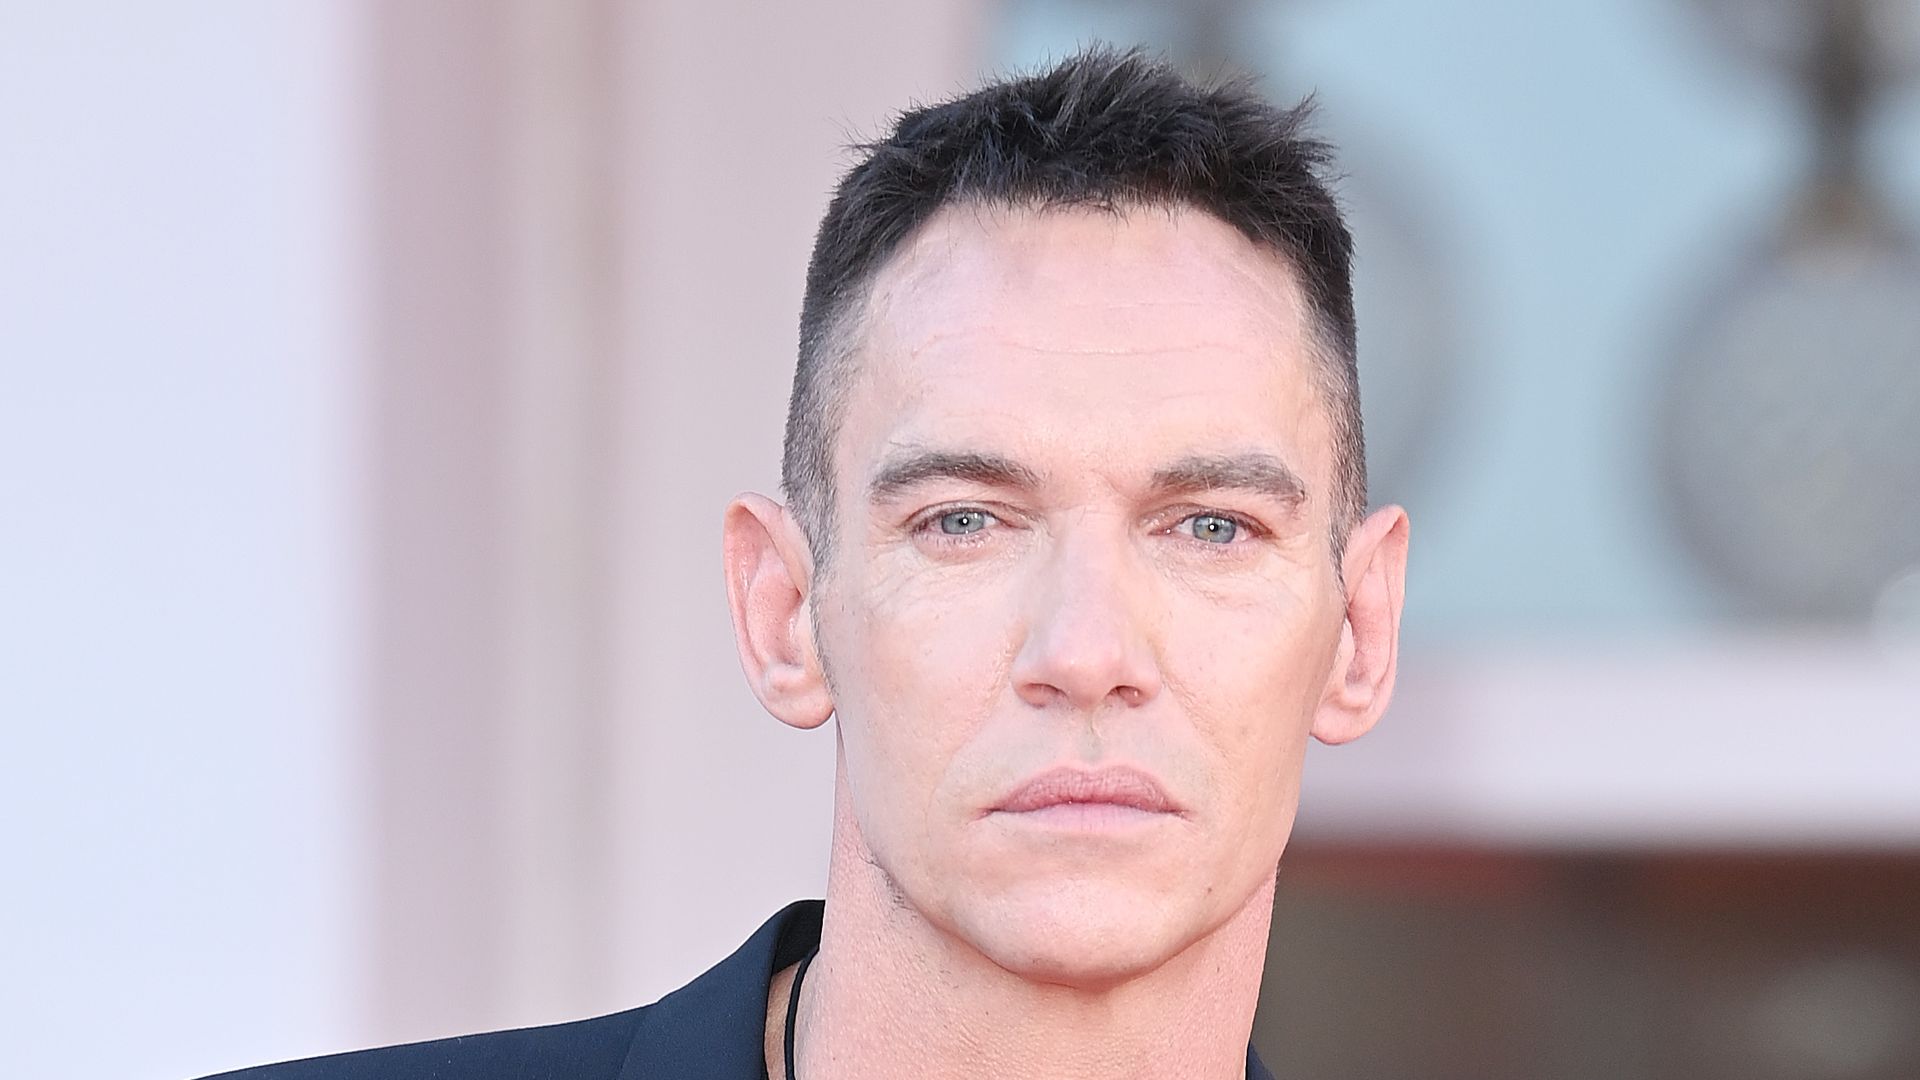 Jonathan Rhys Meyers arrives on the red carpet of the movie "Freaks Out" during the 78th Venice International Film Festival on September 08, 2021 in Venice, Italy. (Photo by Daniele Venturelli/WireImage)